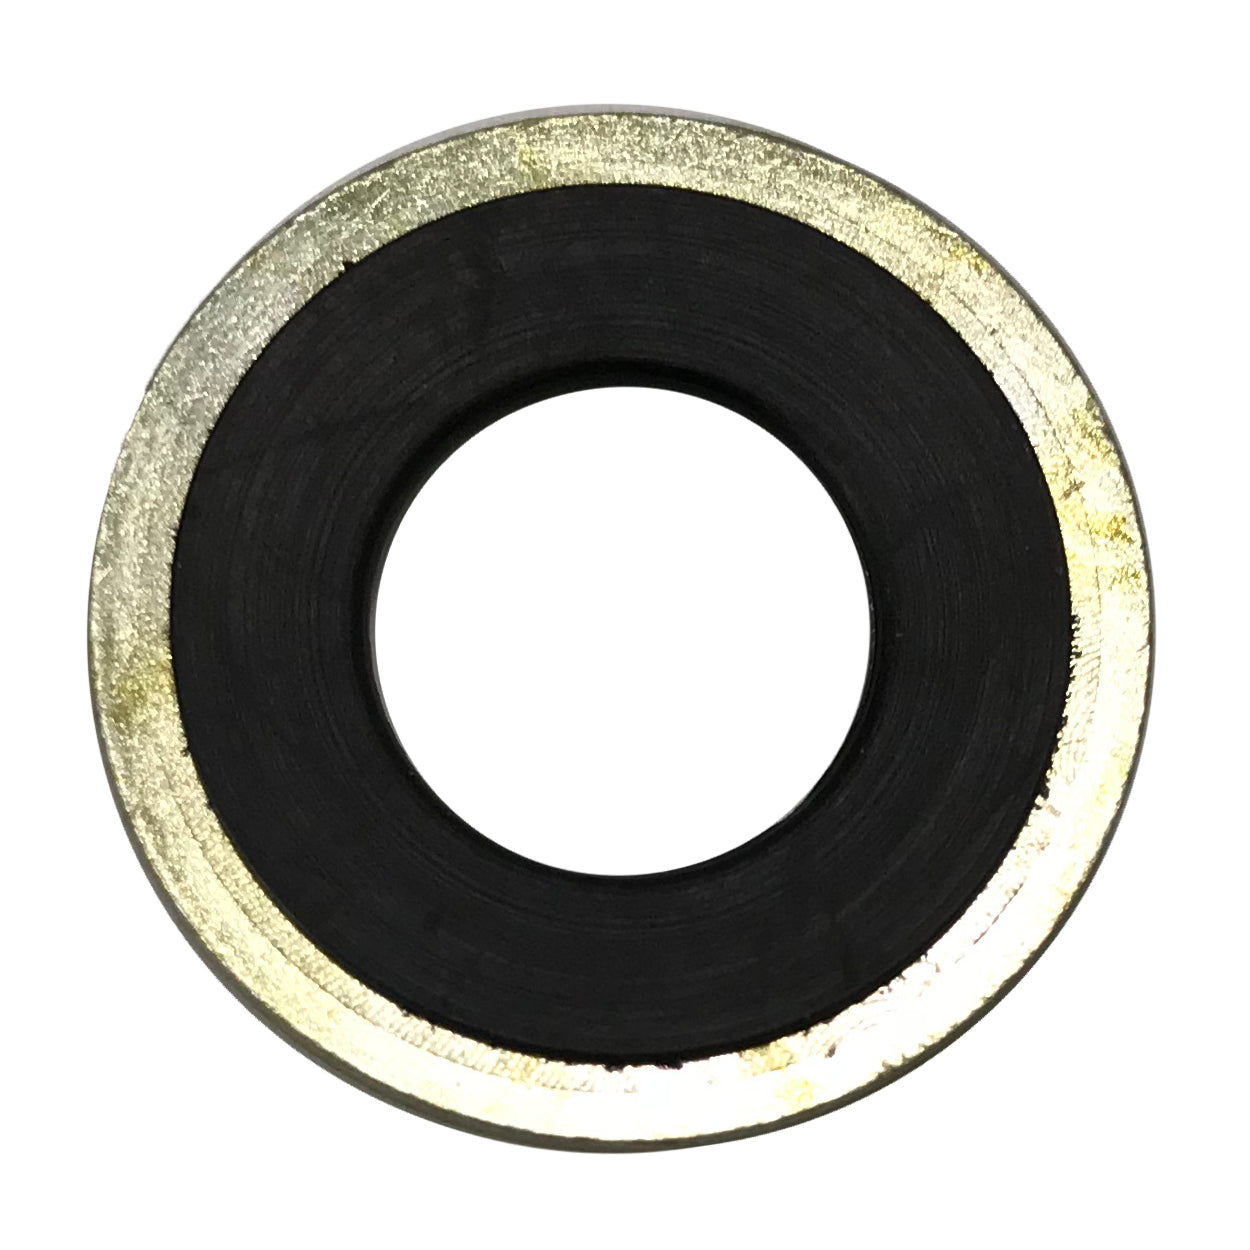 Oil Drain Plug Metal And Rubber Gasket 12 mm GM (Black) O.E. #14090908 24571185 - 25 Pack